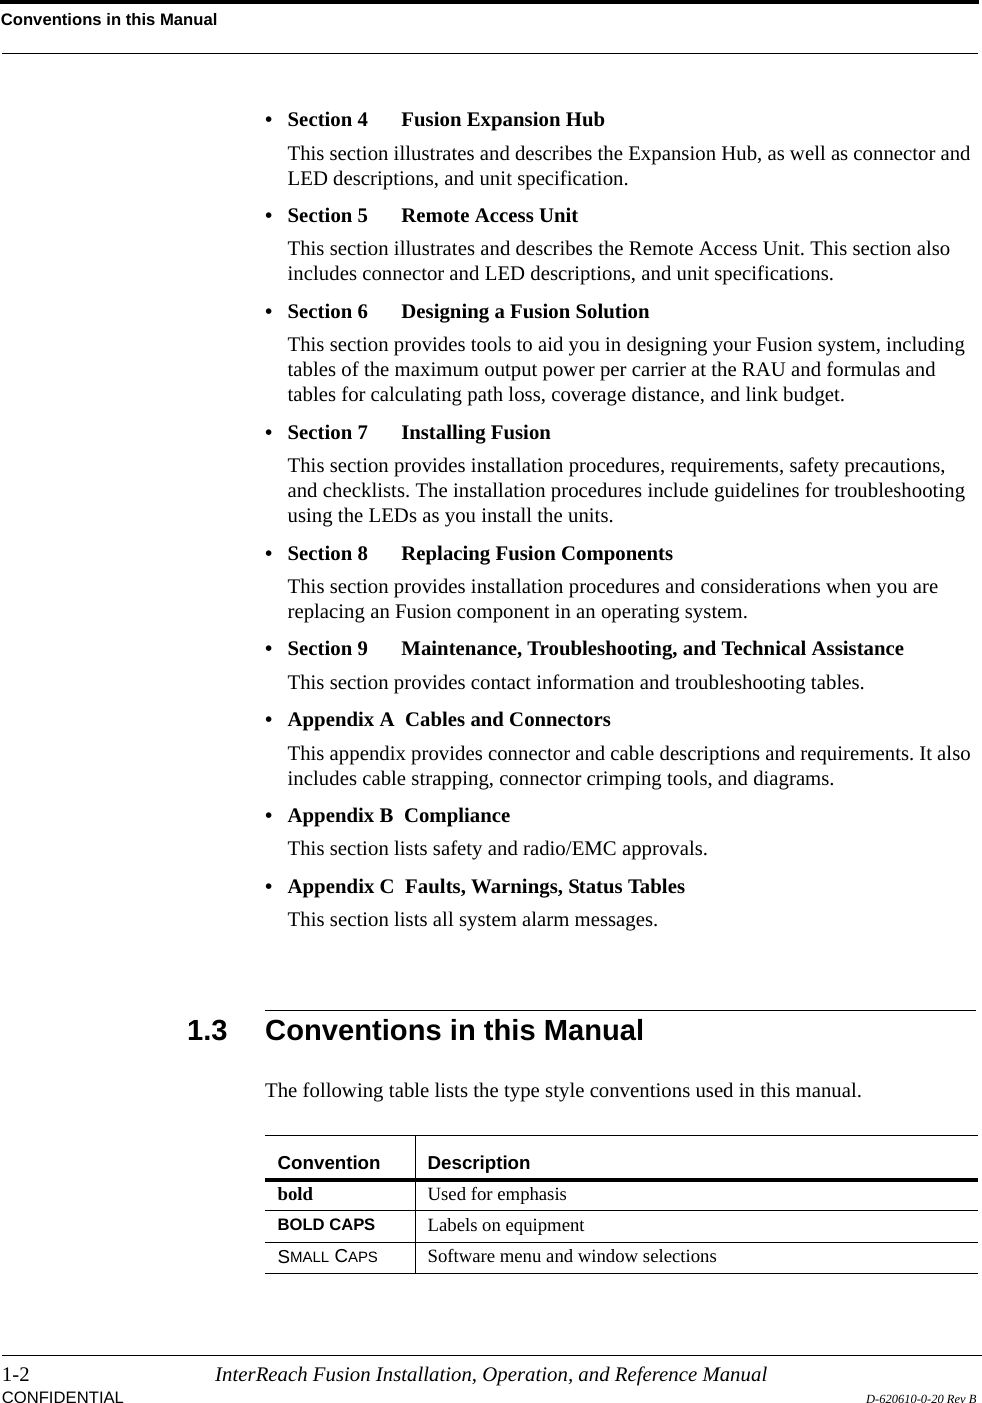 Conventions in this Manual1-2 InterReach Fusion Installation, Operation, and Reference ManualCONFIDENTIAL D-620610-0-20 Rev B• Section 4   Fusion Expansion HubThis section illustrates and describes the Expansion Hub, as well as connector and LED descriptions, and unit specification.• Section 5   Remote Access UnitThis section illustrates and describes the Remote Access Unit. This section also includes connector and LED descriptions, and unit specifications.• Section 6   Designing a Fusion SolutionThis section provides tools to aid you in designing your Fusion system, including tables of the maximum output power per carrier at the RAU and formulas and tables for calculating path loss, coverage distance, and link budget.• Section 7  Installing FusionThis section provides installation procedures, requirements, safety precautions, and checklists. The installation procedures include guidelines for troubleshooting using the LEDs as you install the units.• Section 8   Replacing Fusion ComponentsThis section provides installation procedures and considerations when you are replacing an Fusion component in an operating system.• Section 9  Maintenance, Troubleshooting, and Technical AssistanceThis section provides contact information and troubleshooting tables.• Appendix A  Cables and ConnectorsThis appendix provides connector and cable descriptions and requirements. It also includes cable strapping, connector crimping tools, and diagrams.• Appendix B  ComplianceThis section lists safety and radio/EMC approvals.• Appendix C  Faults, Warnings, Status TablesThis section lists all system alarm messages.1.3 Conventions in this ManualThe following table lists the type style conventions used in this manual.Convention Descriptionbold Used for emphasisBOLD CAPS Labels on equipmentSMALL CAPS Software menu and window selections